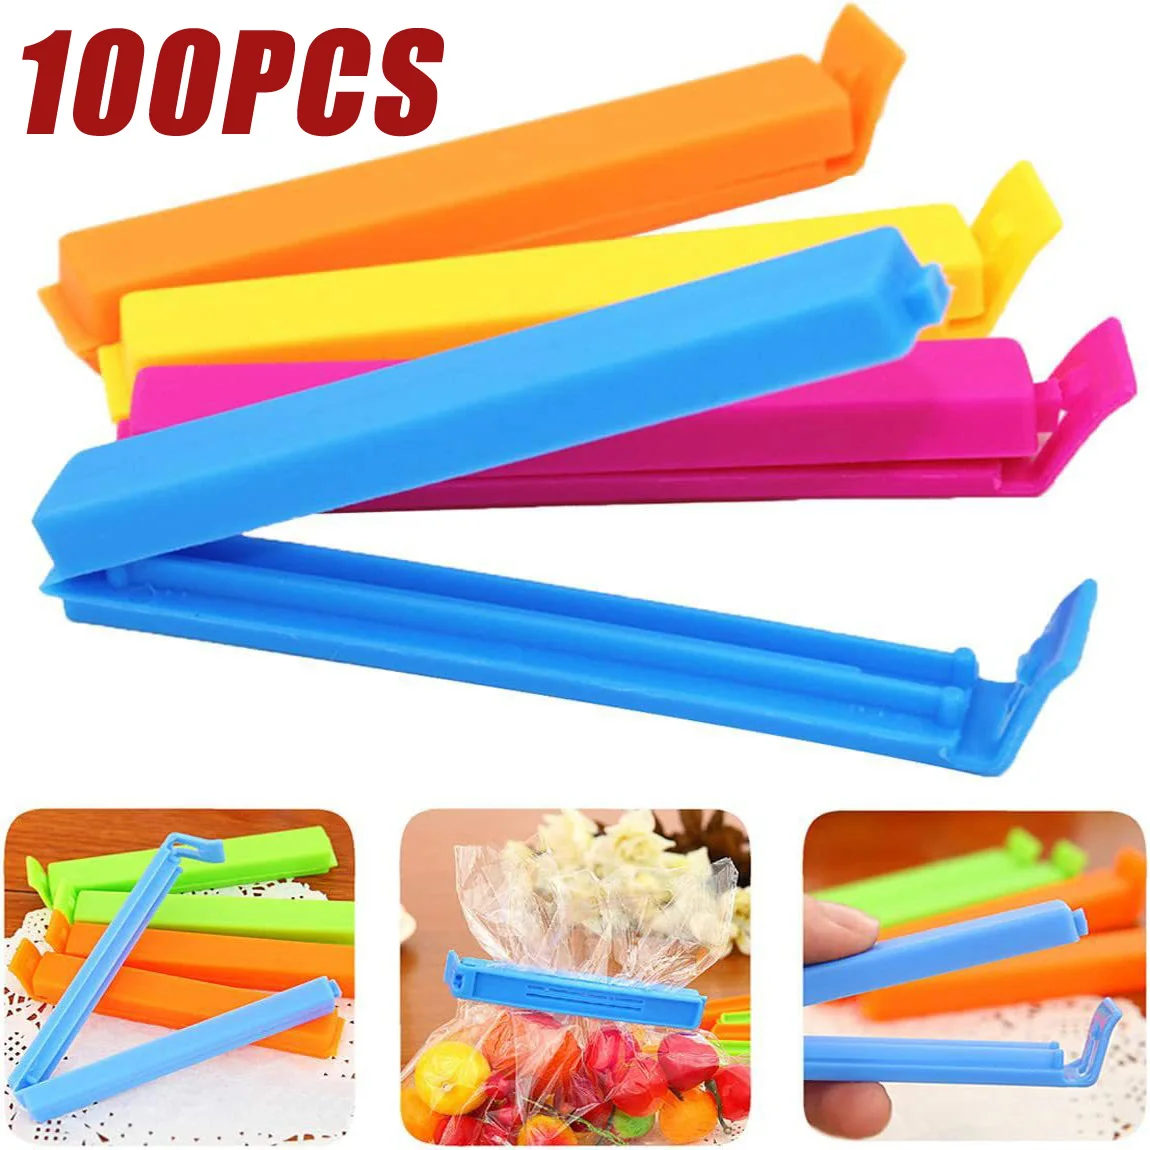 50/100PCS Portable Kitchen Storage Food Snack Seal Sealing Bag Clips Random Color Plastic Tool Kitchen Accessories Hot Sale 5pcs plastic bag sealing clip with stroage case snack fresh food storage bag seal clips kitchen tool cactus shape sealer clamp